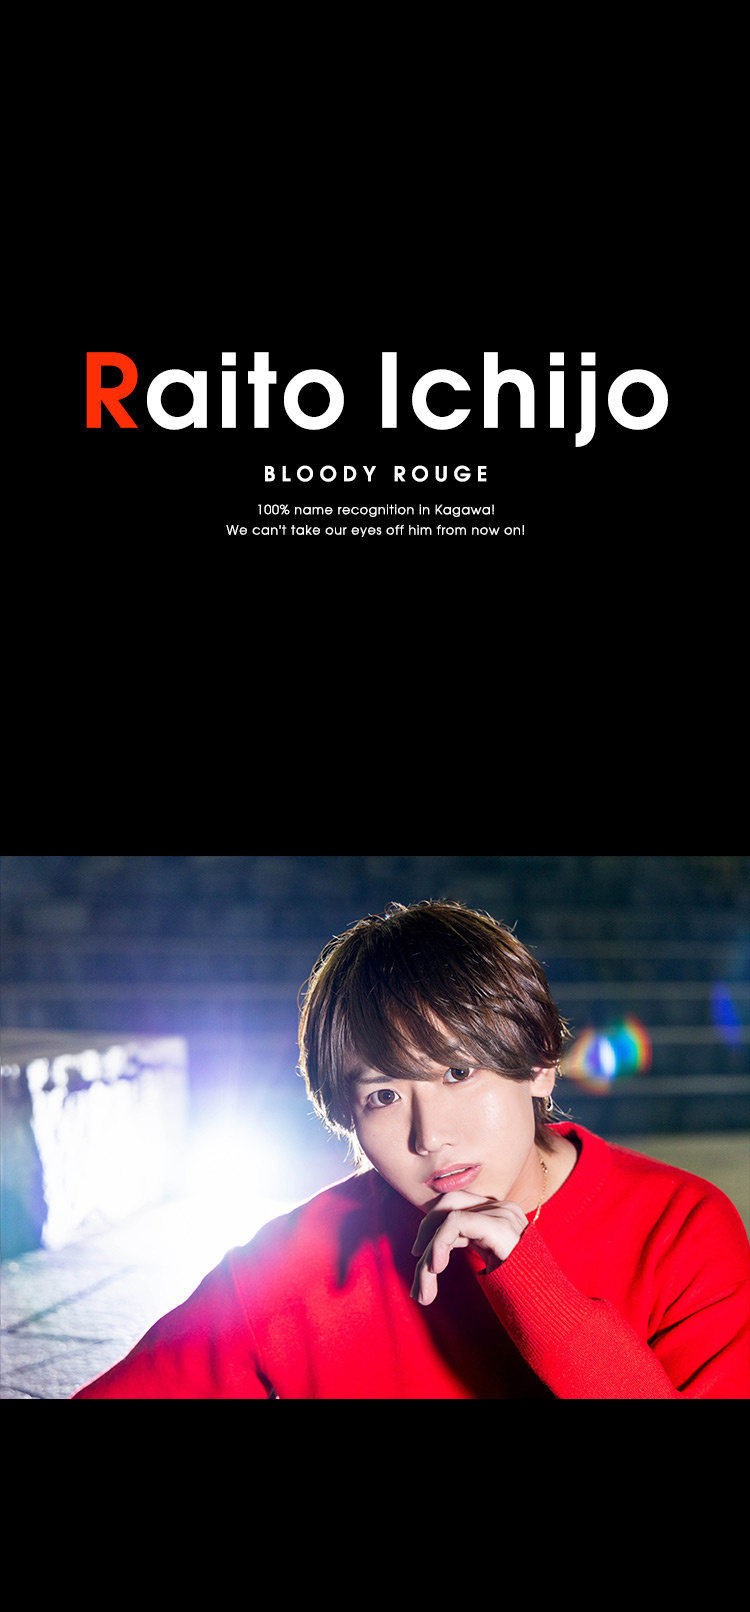 「BLOODY ROUGE」No.1ホスト一条 月主任が出演